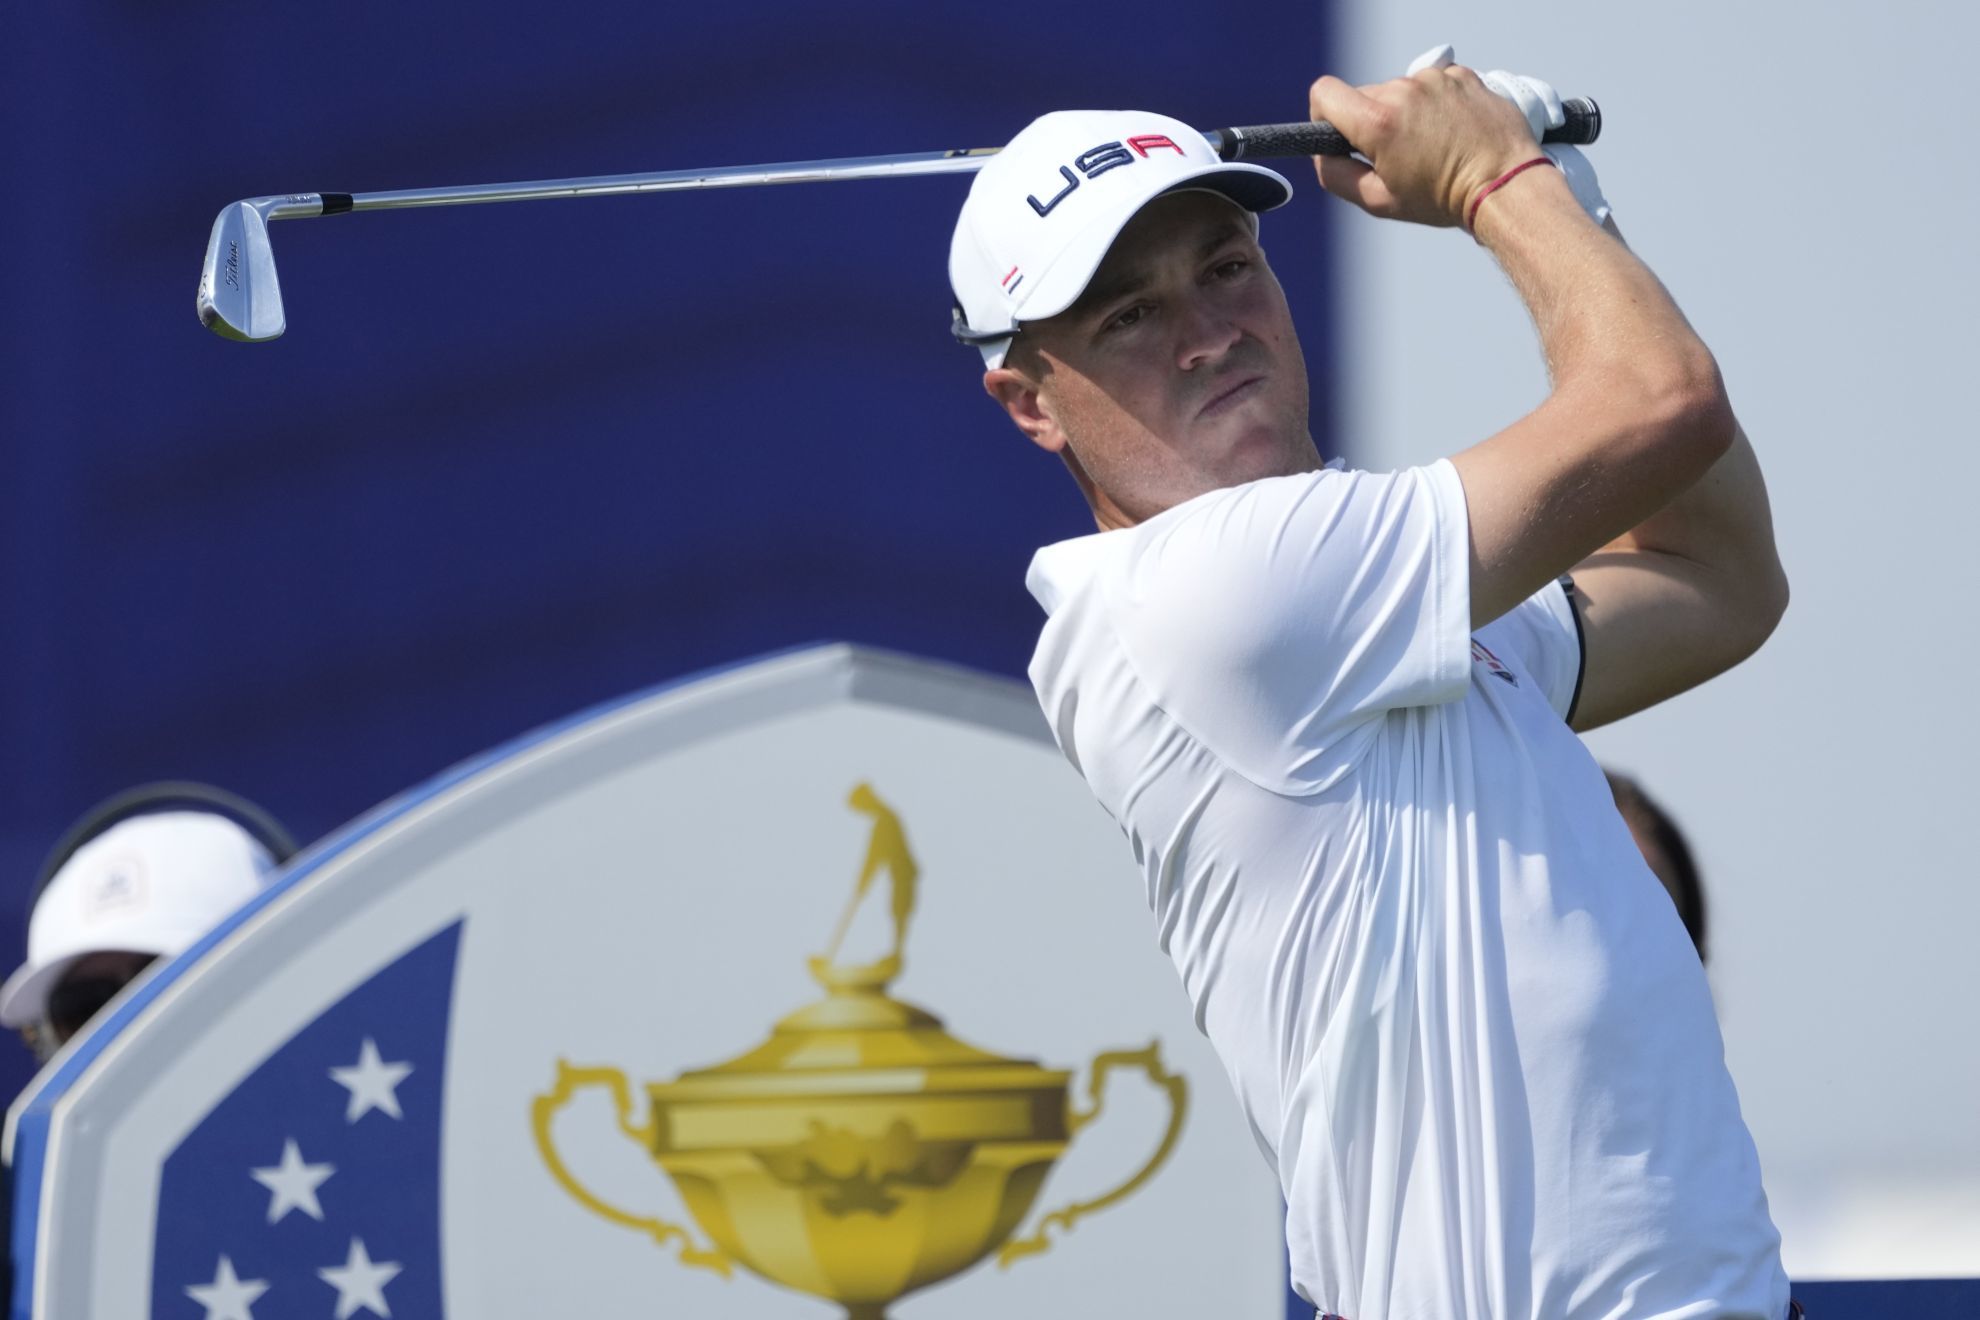 Ryder Cup Friday pairings and tee times for the first day of the international golf tournament